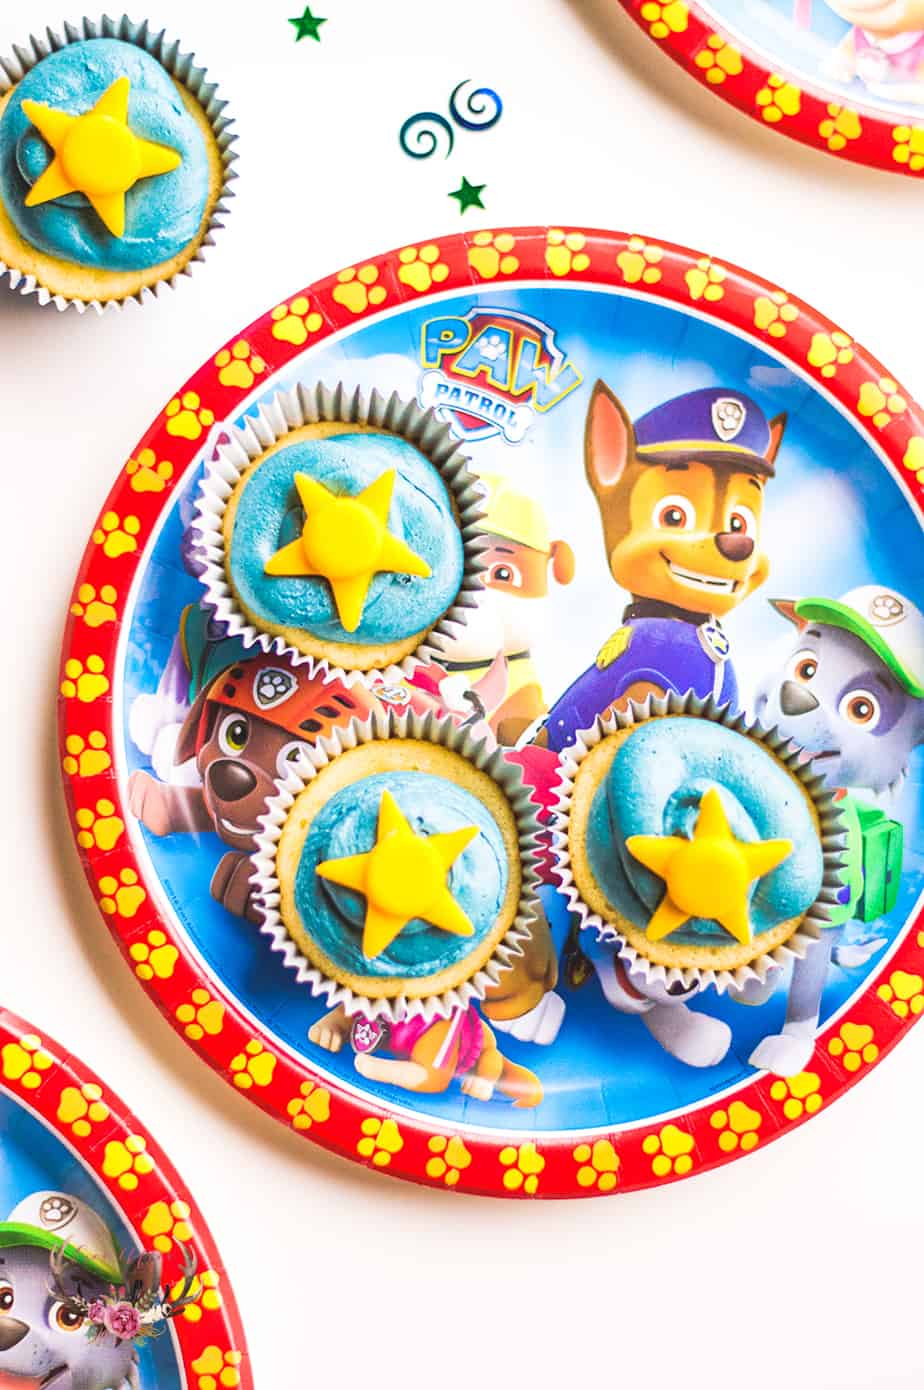 If you have a toddler, these Paw Patrol Cupcakes are exactly what you need to make the everyday special.